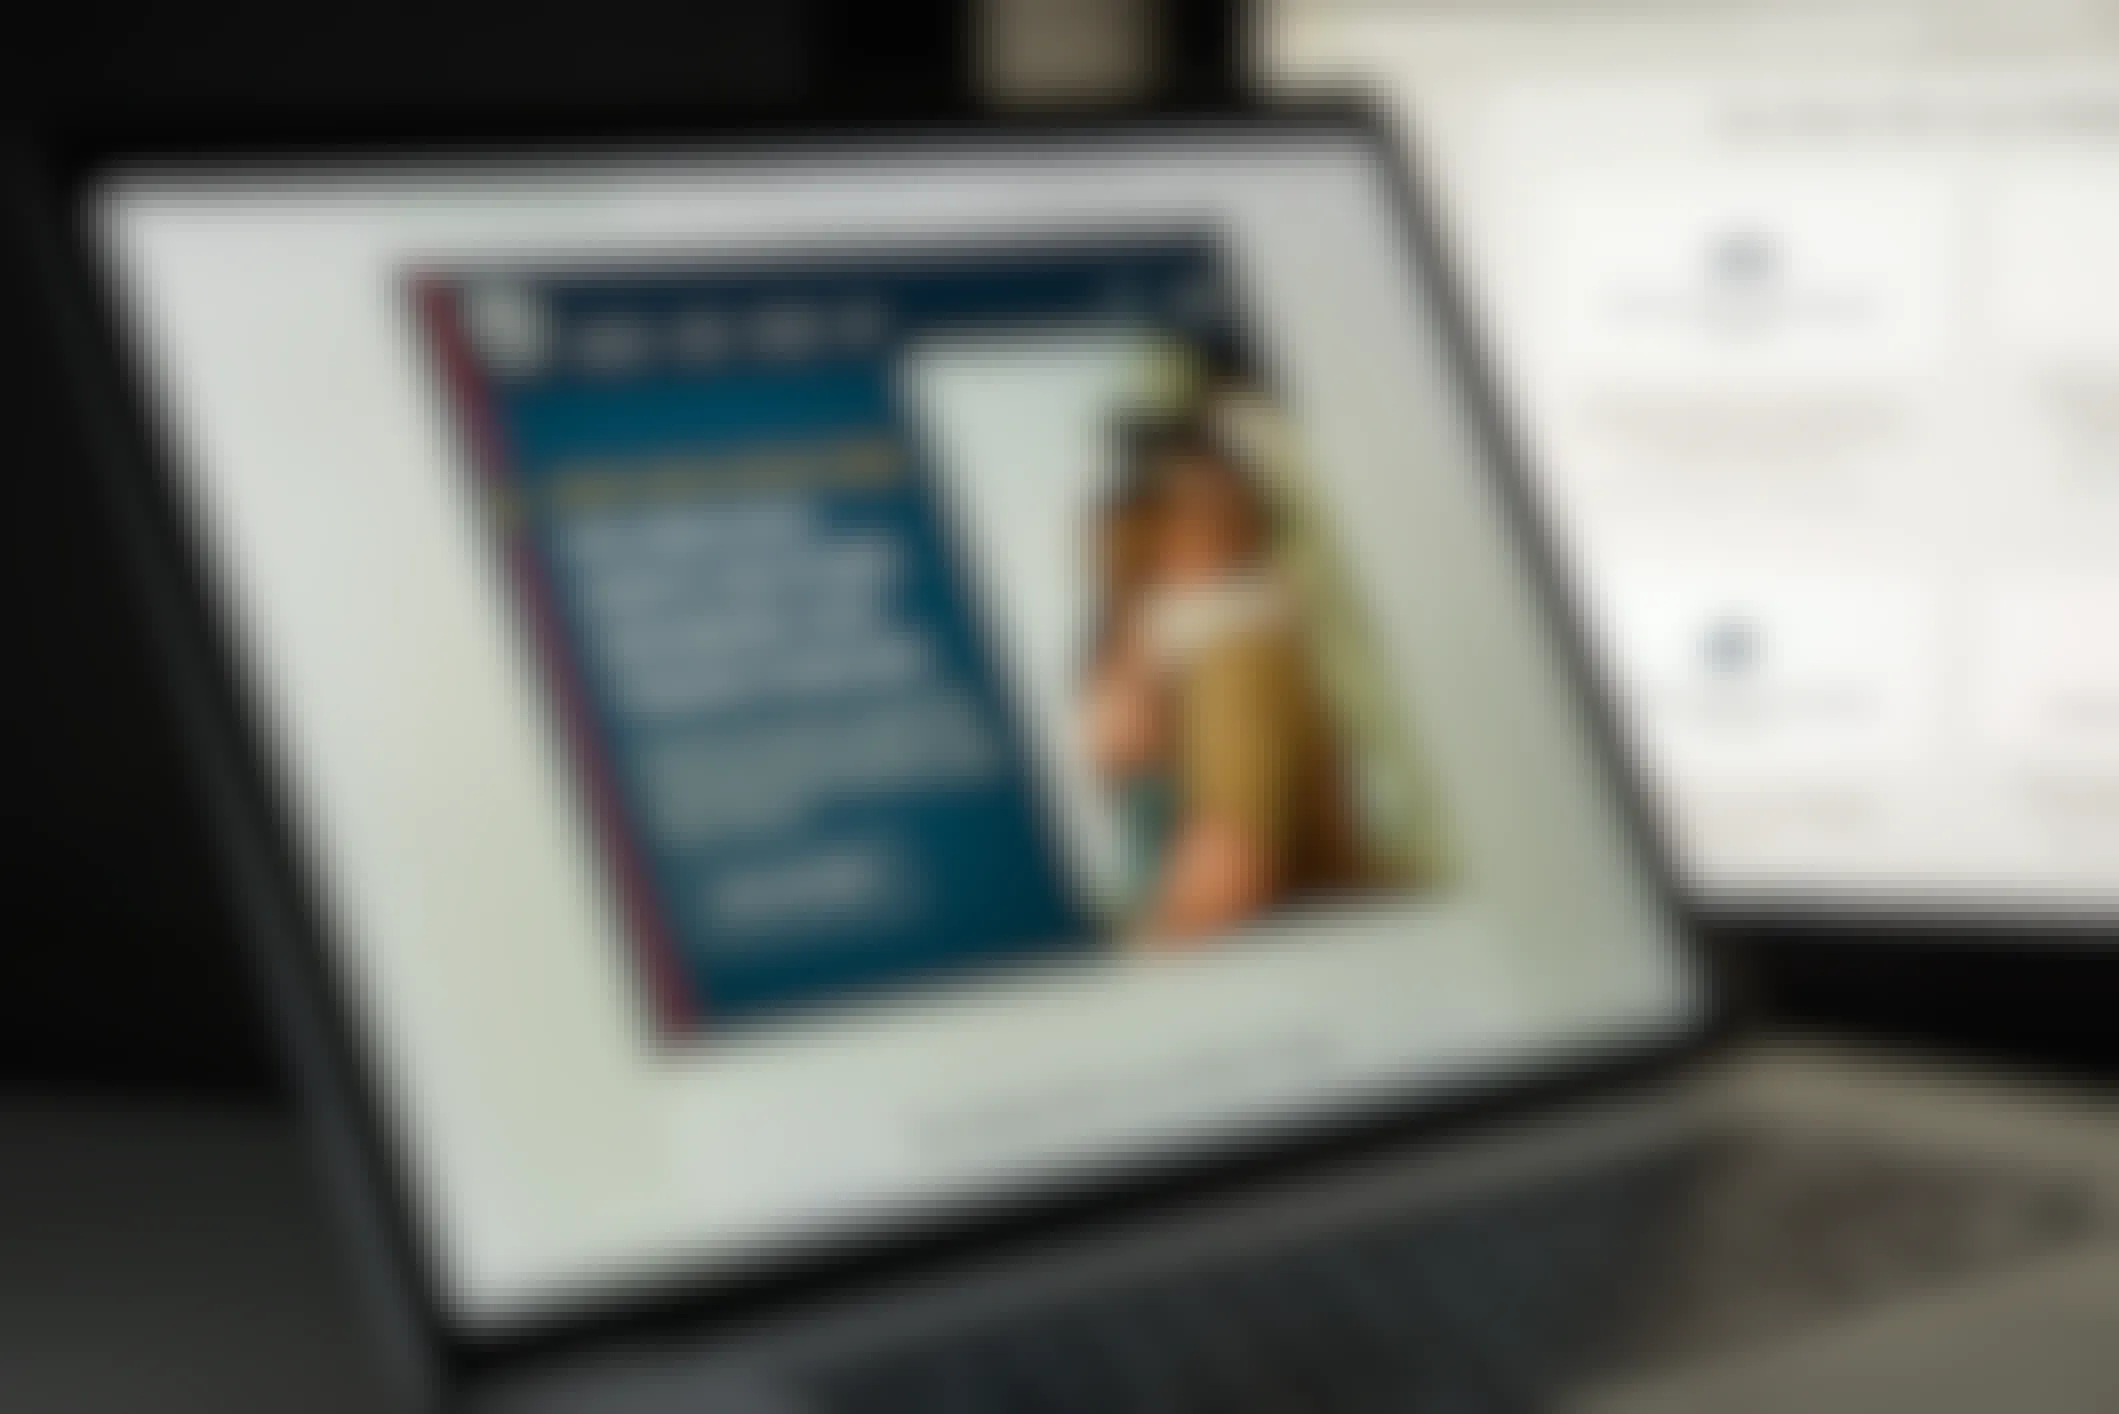 USAA's website pulled up on a laptop screen.